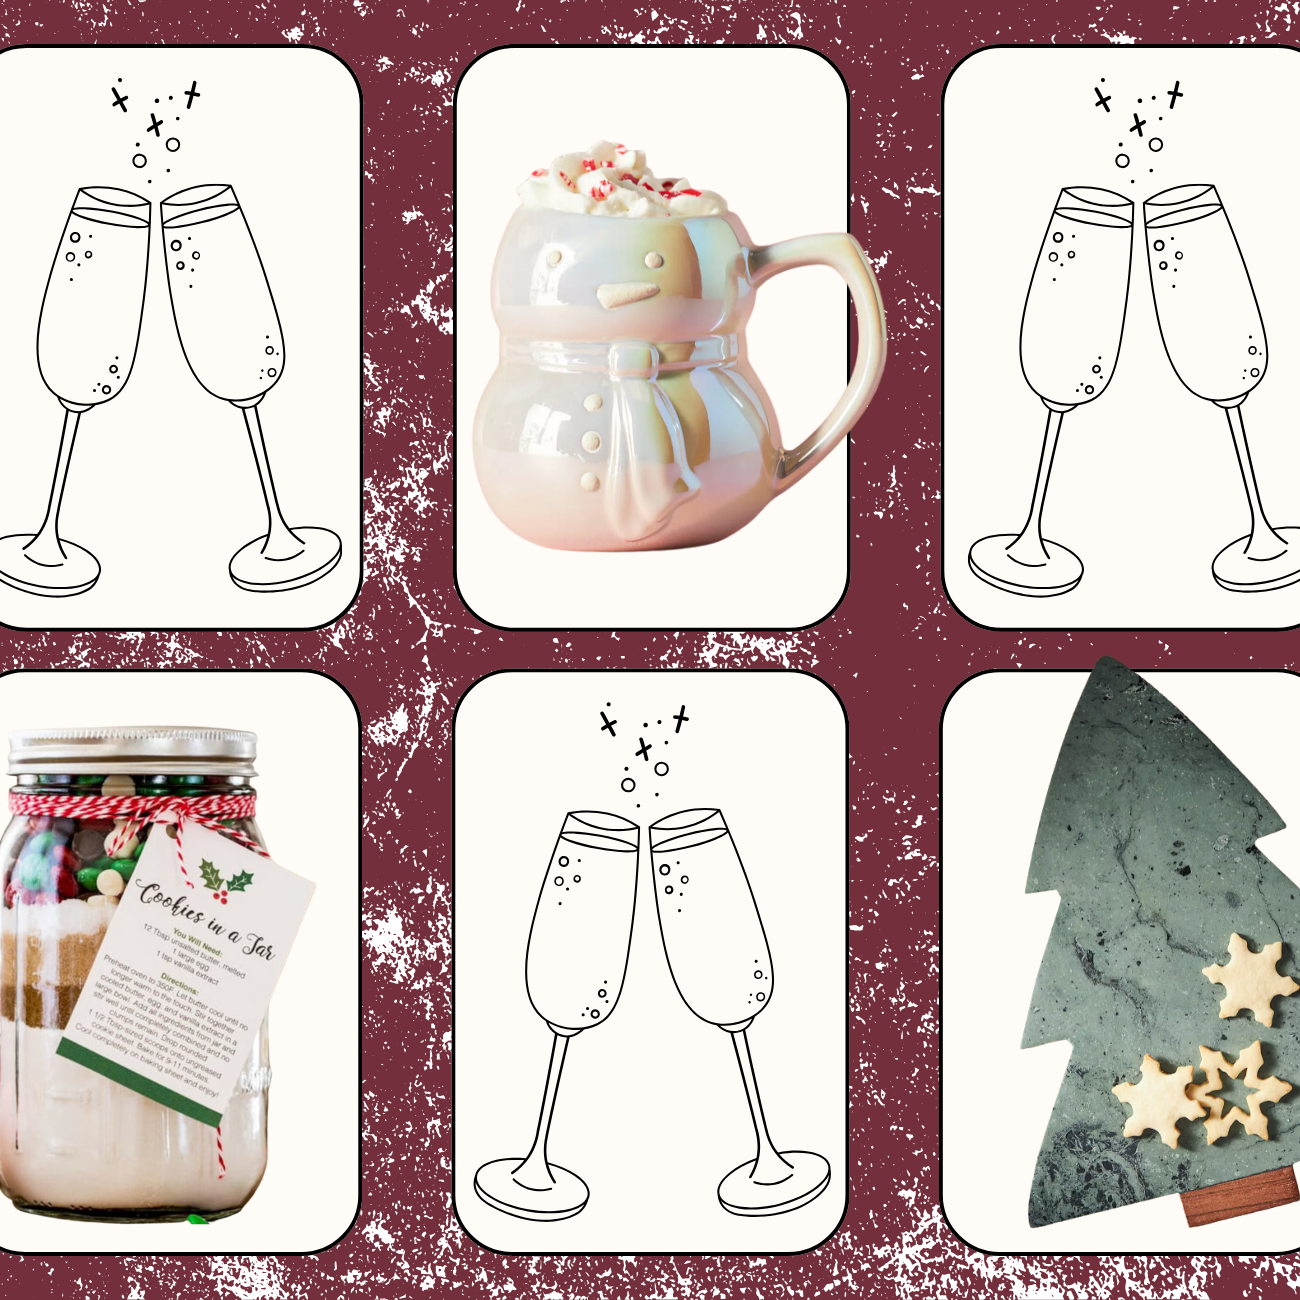 Holiday Hostess Gift Guide